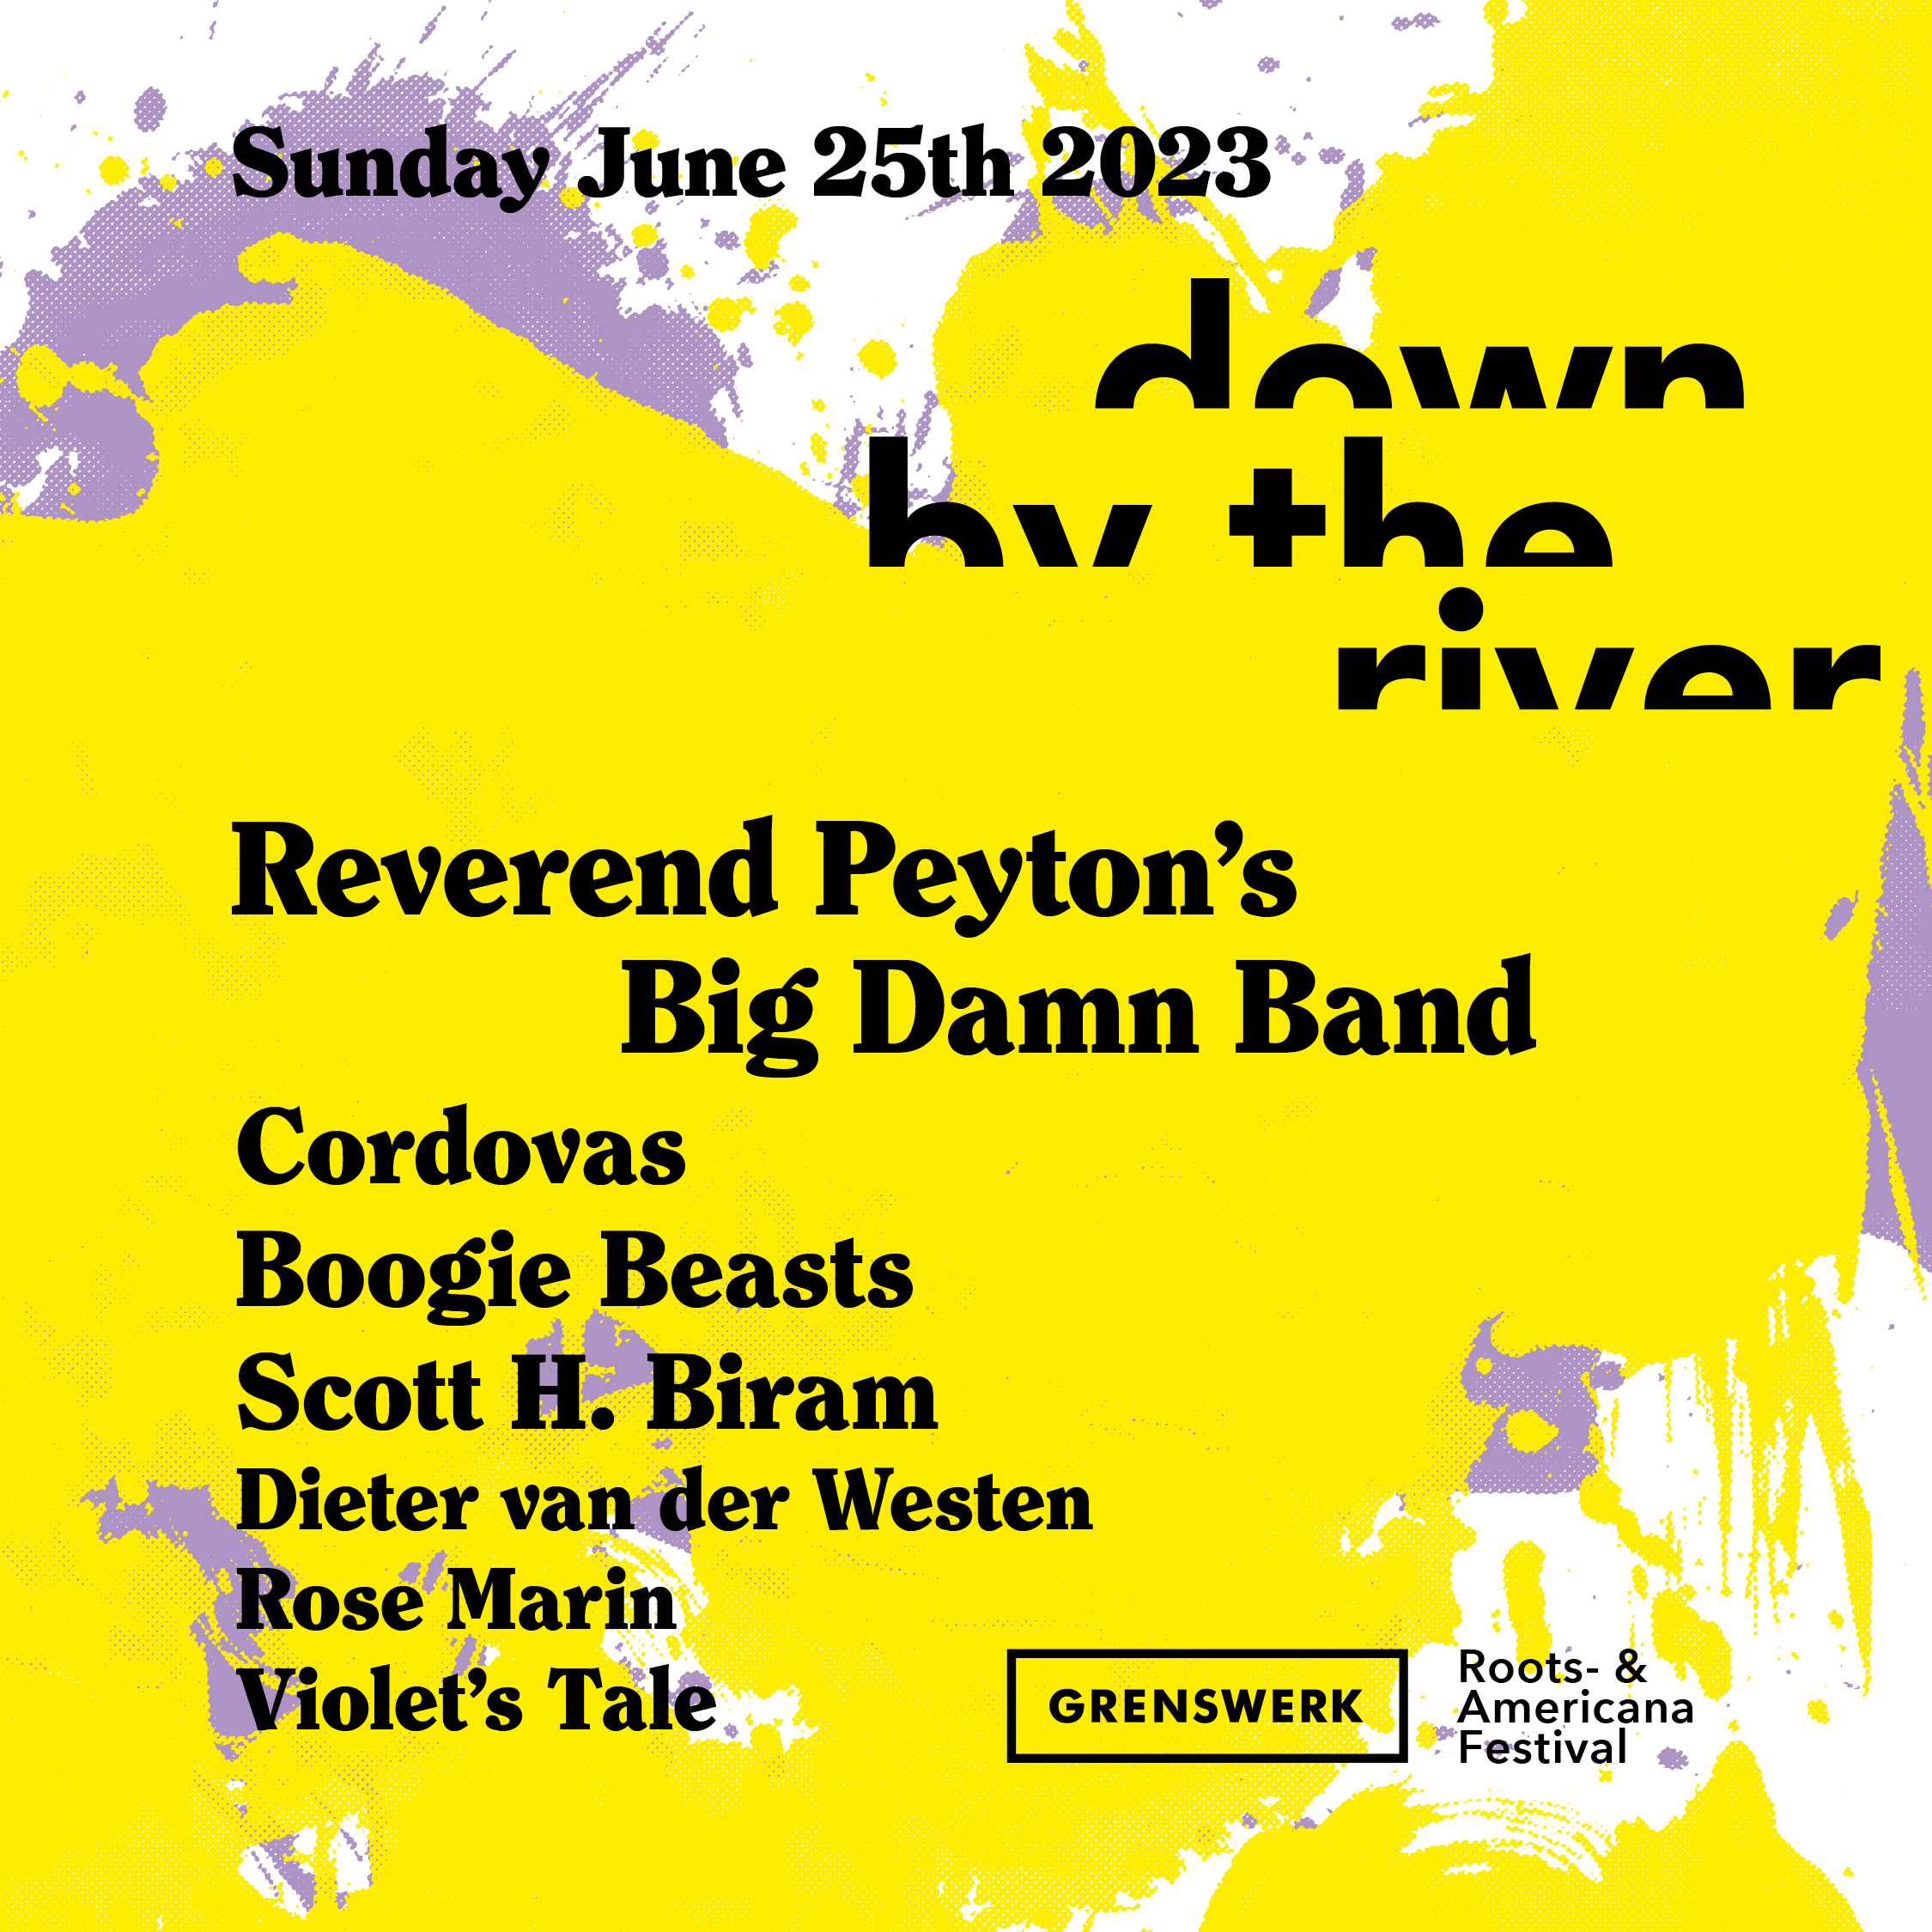 Down By The River: Reverend Peyton's Big Damn Band, Cordovas, Scott H. Biram, Boogie Beasts and more